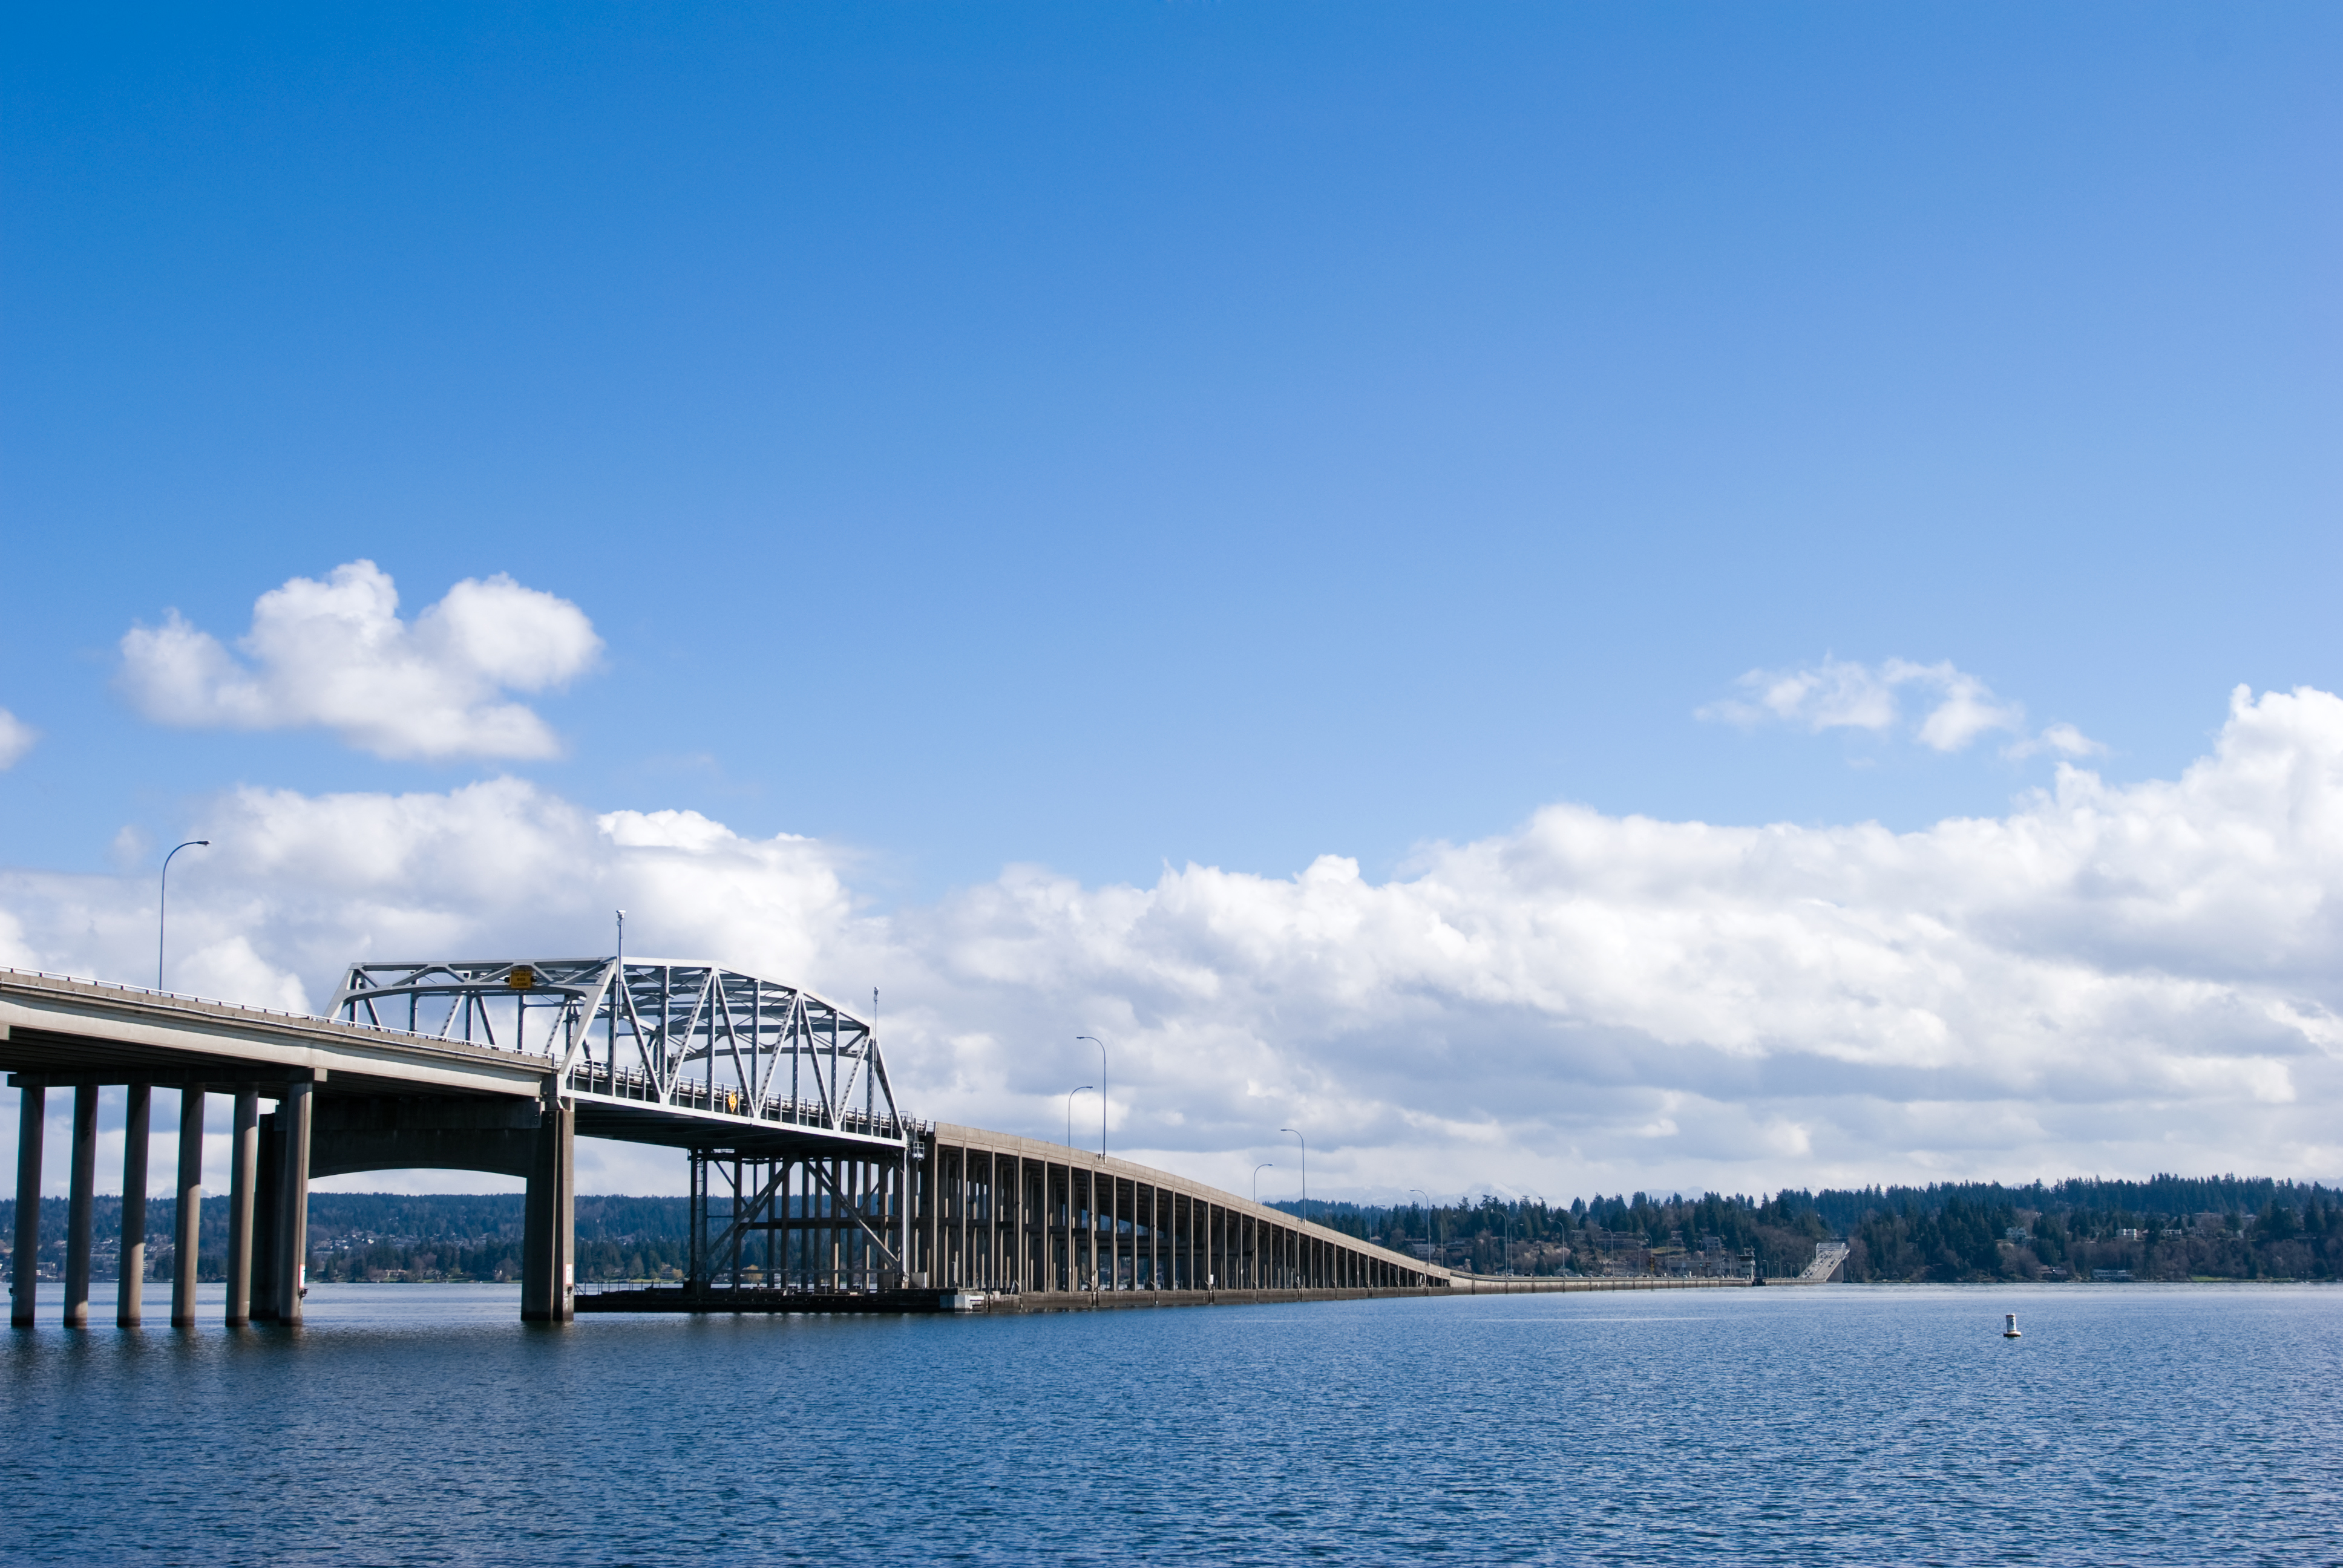 The SR 520, Washington state says, is the longest floating bridge in the world.